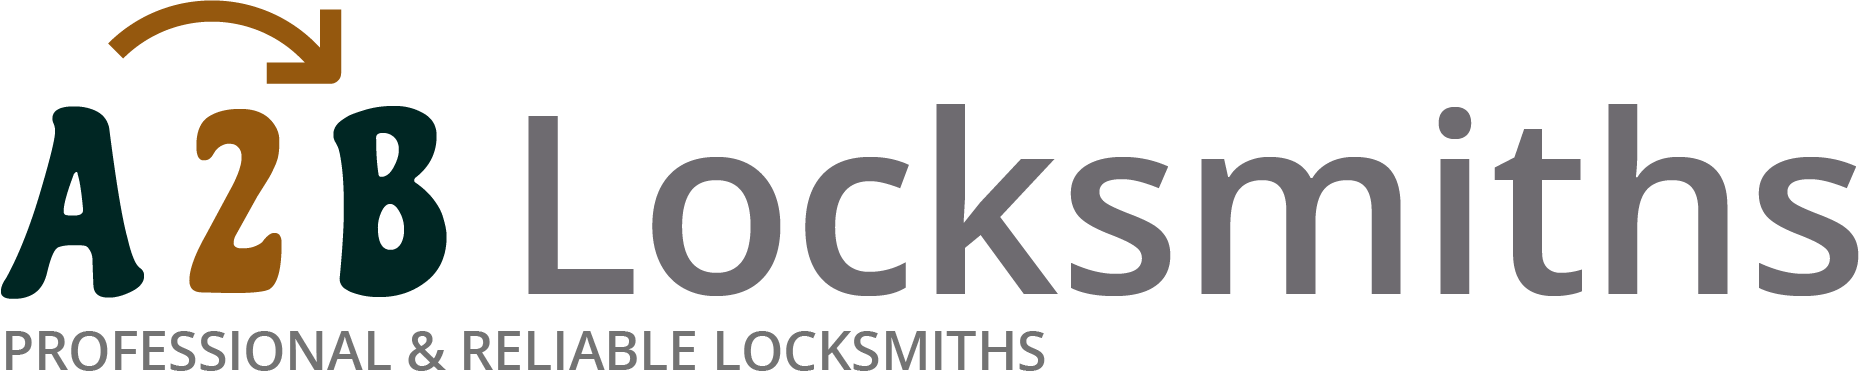 If you are locked out of house in Leominster, our 24/7 local emergency locksmith services can help you.